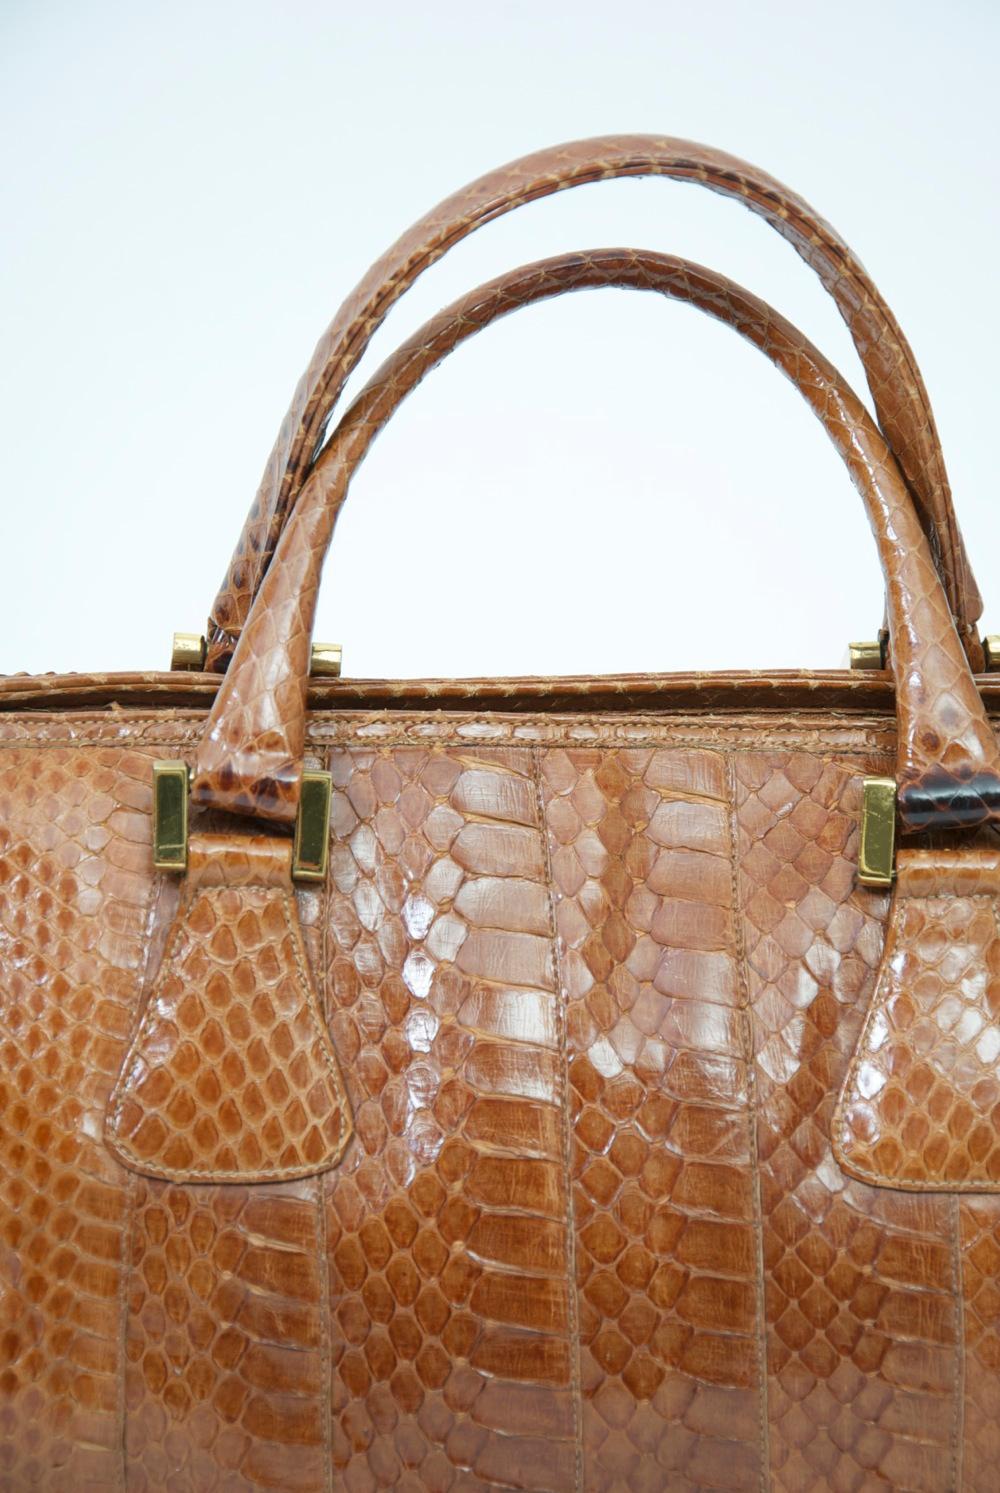 Vintage c.1970s doctor-style handbag in cognac snakeskin by Morris Moskowitz, which produced some of the best bags of the period. Double handles, top zipper with logo pull, metal studs on bottom. Interior with zippered compartment.